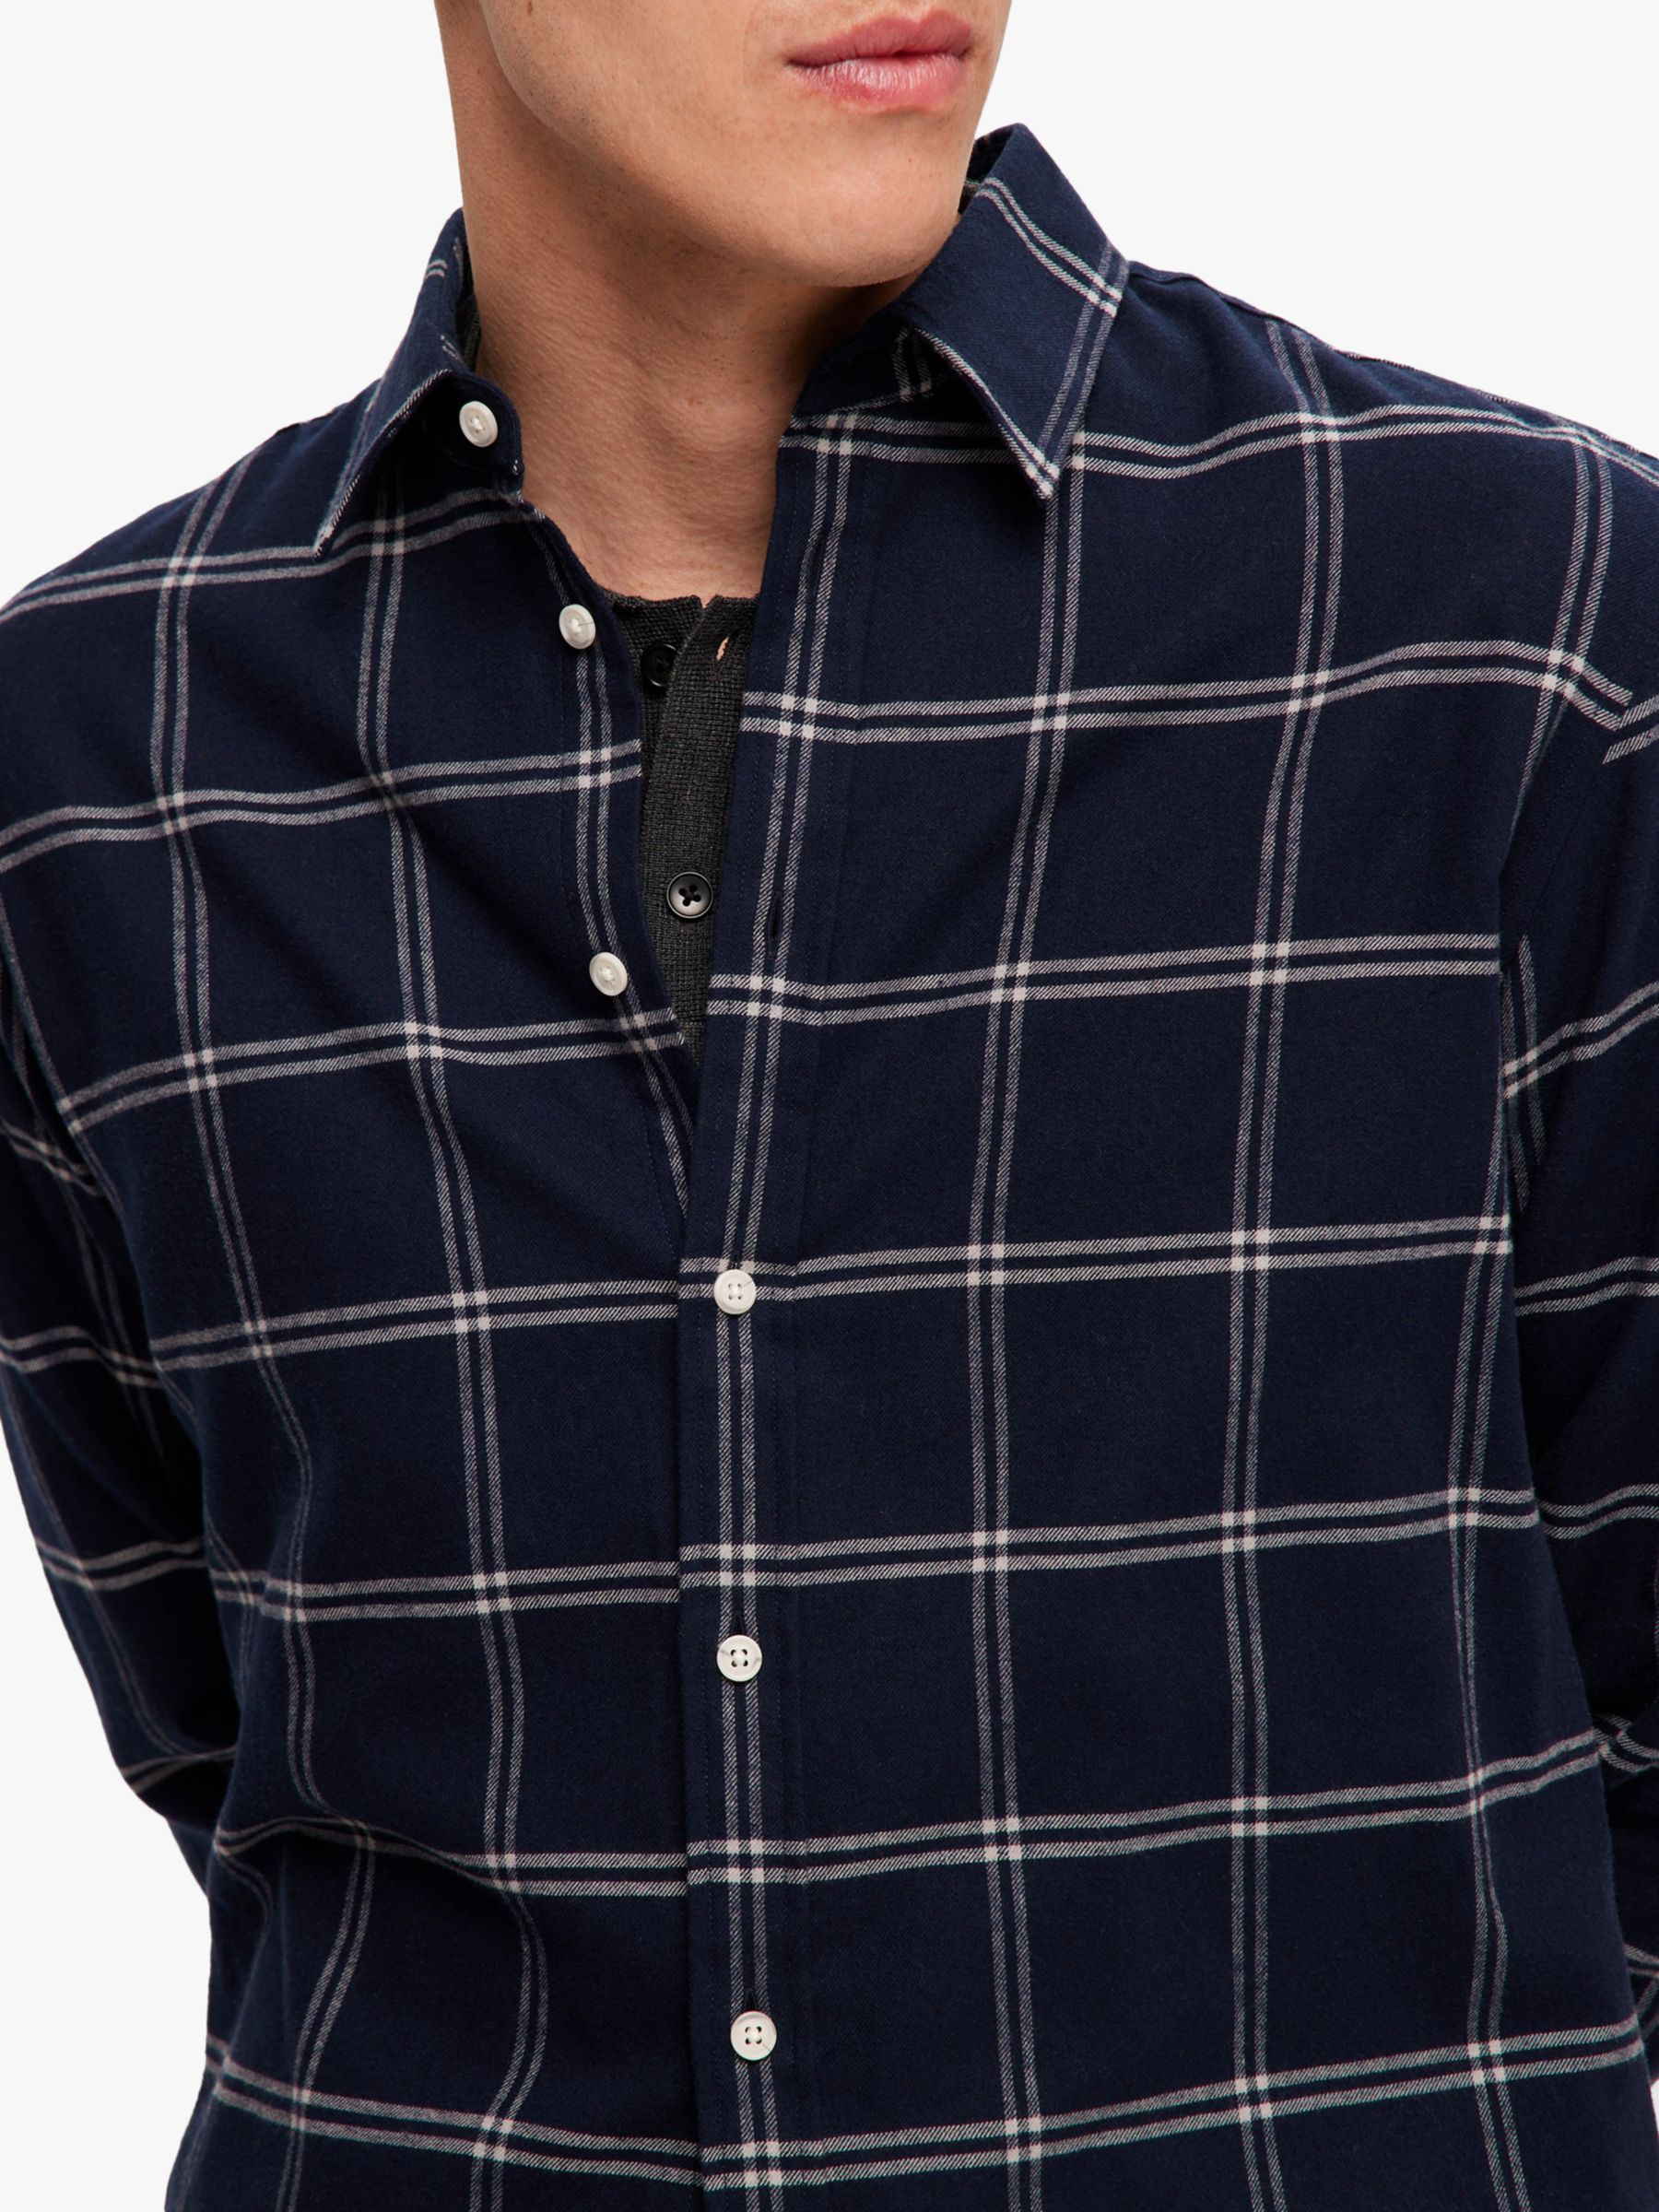 Buy SELECTED HOMME Cotton Flannel Shirt Copied Online at johnlewis.com